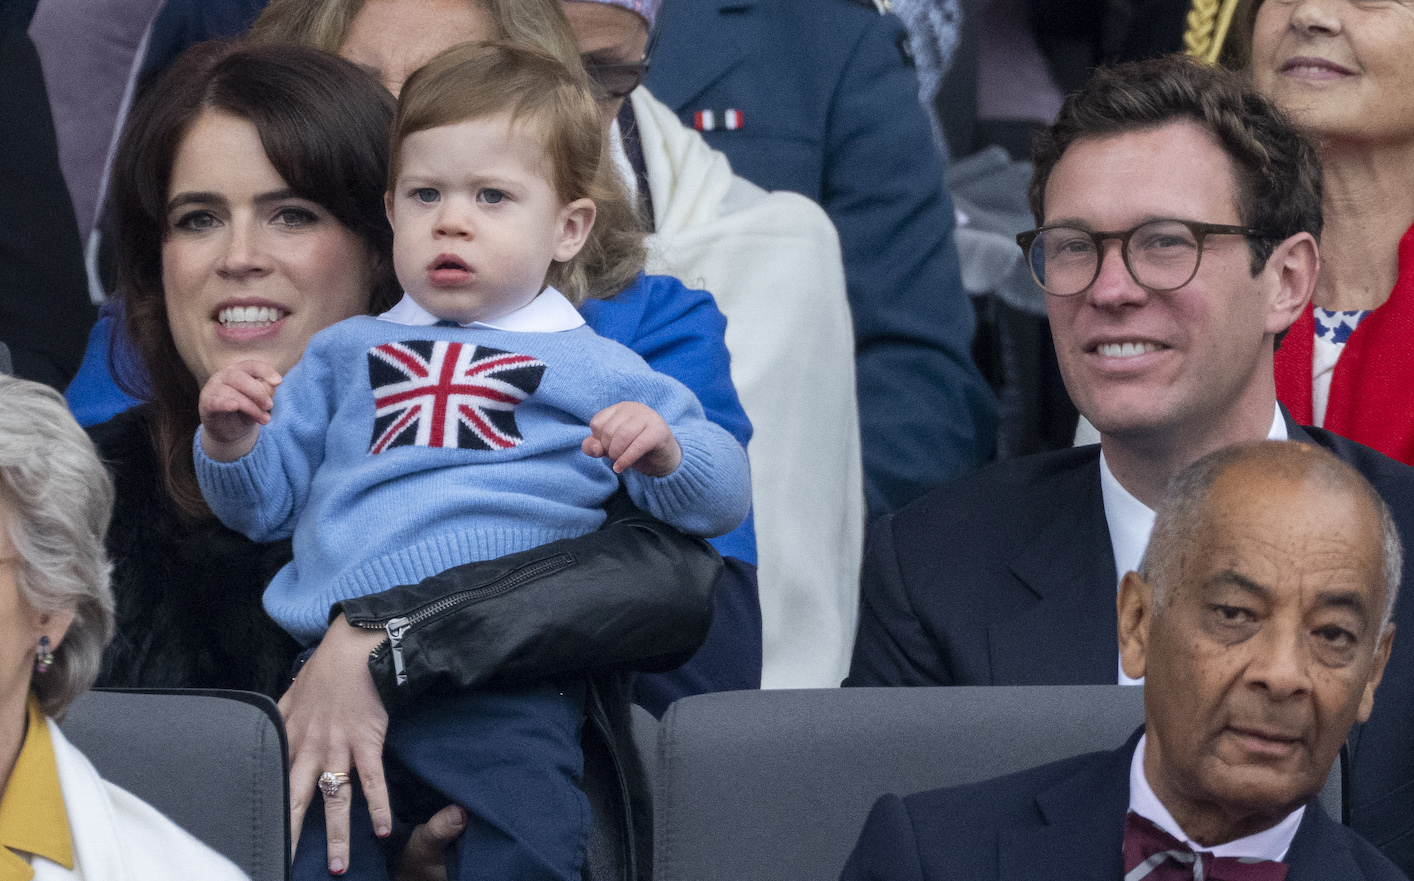 Princess Eugenie holding her son next to Jack Brooksbank at a crowded event